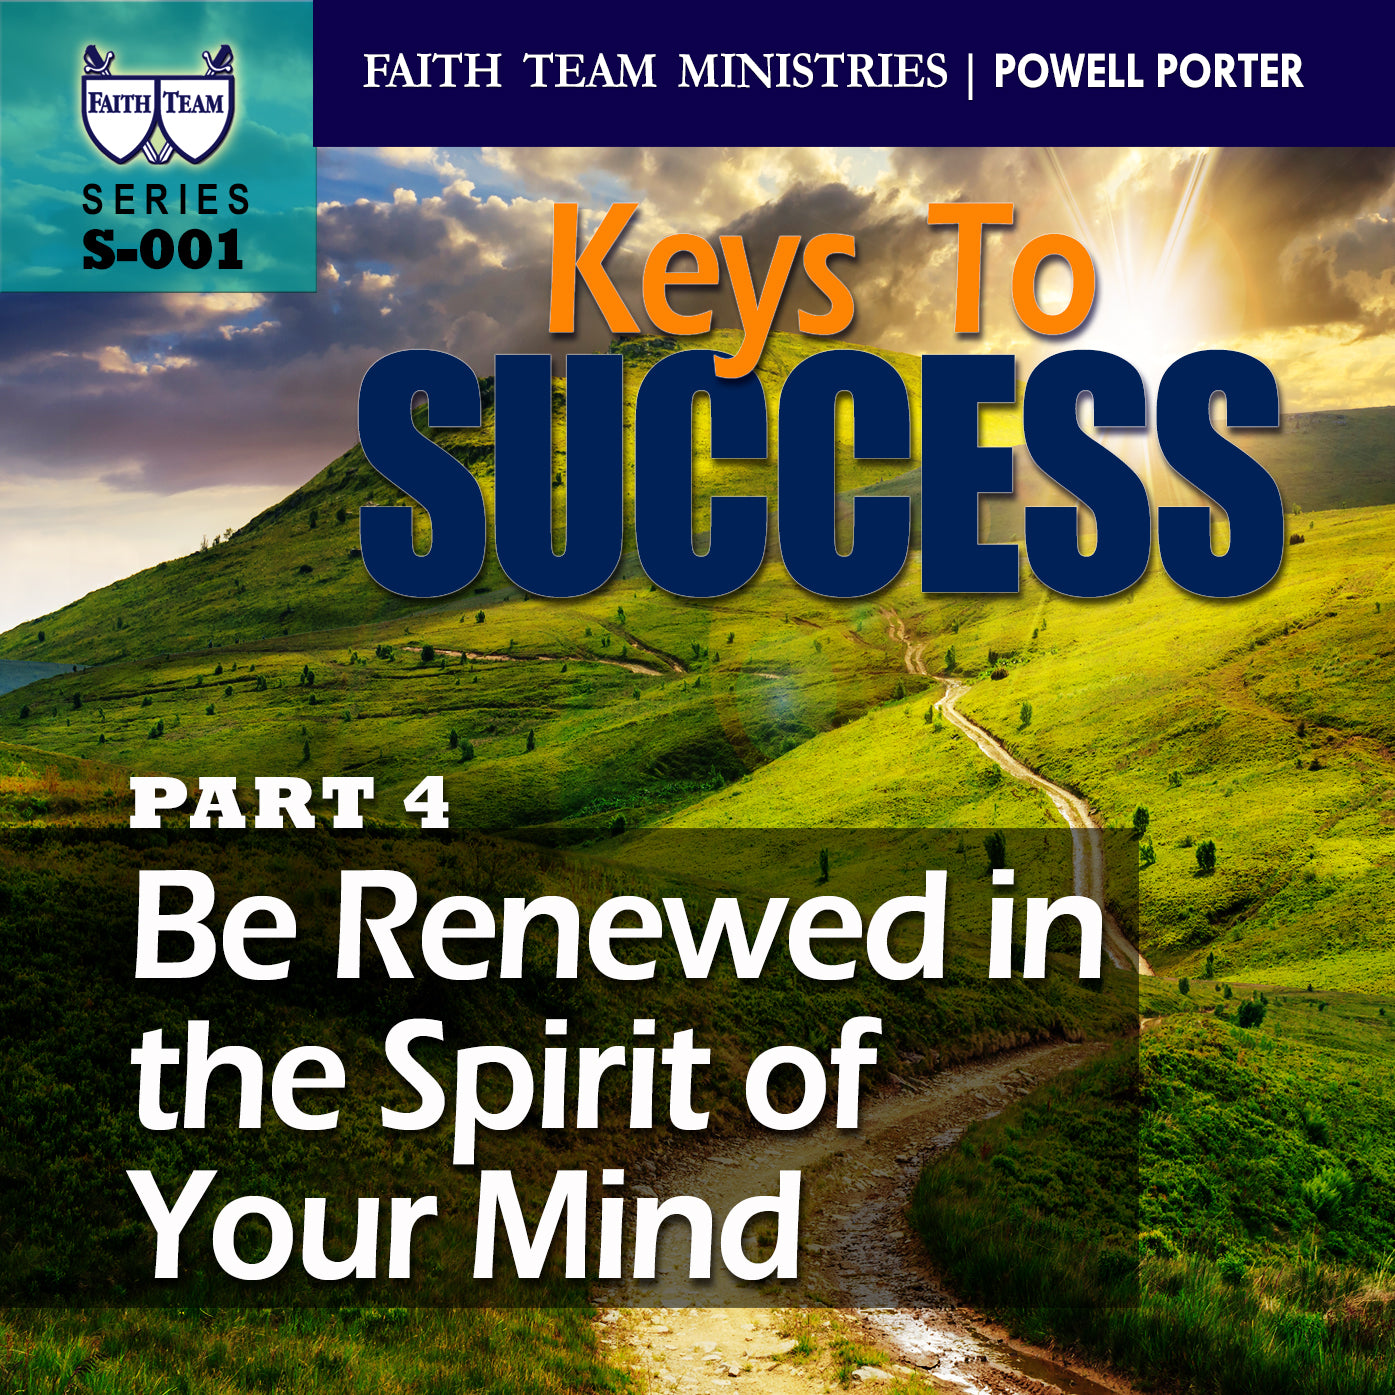 KEYS TO SUCCESS | Part 4: Be Renewed In The Spirit Of Your Mind